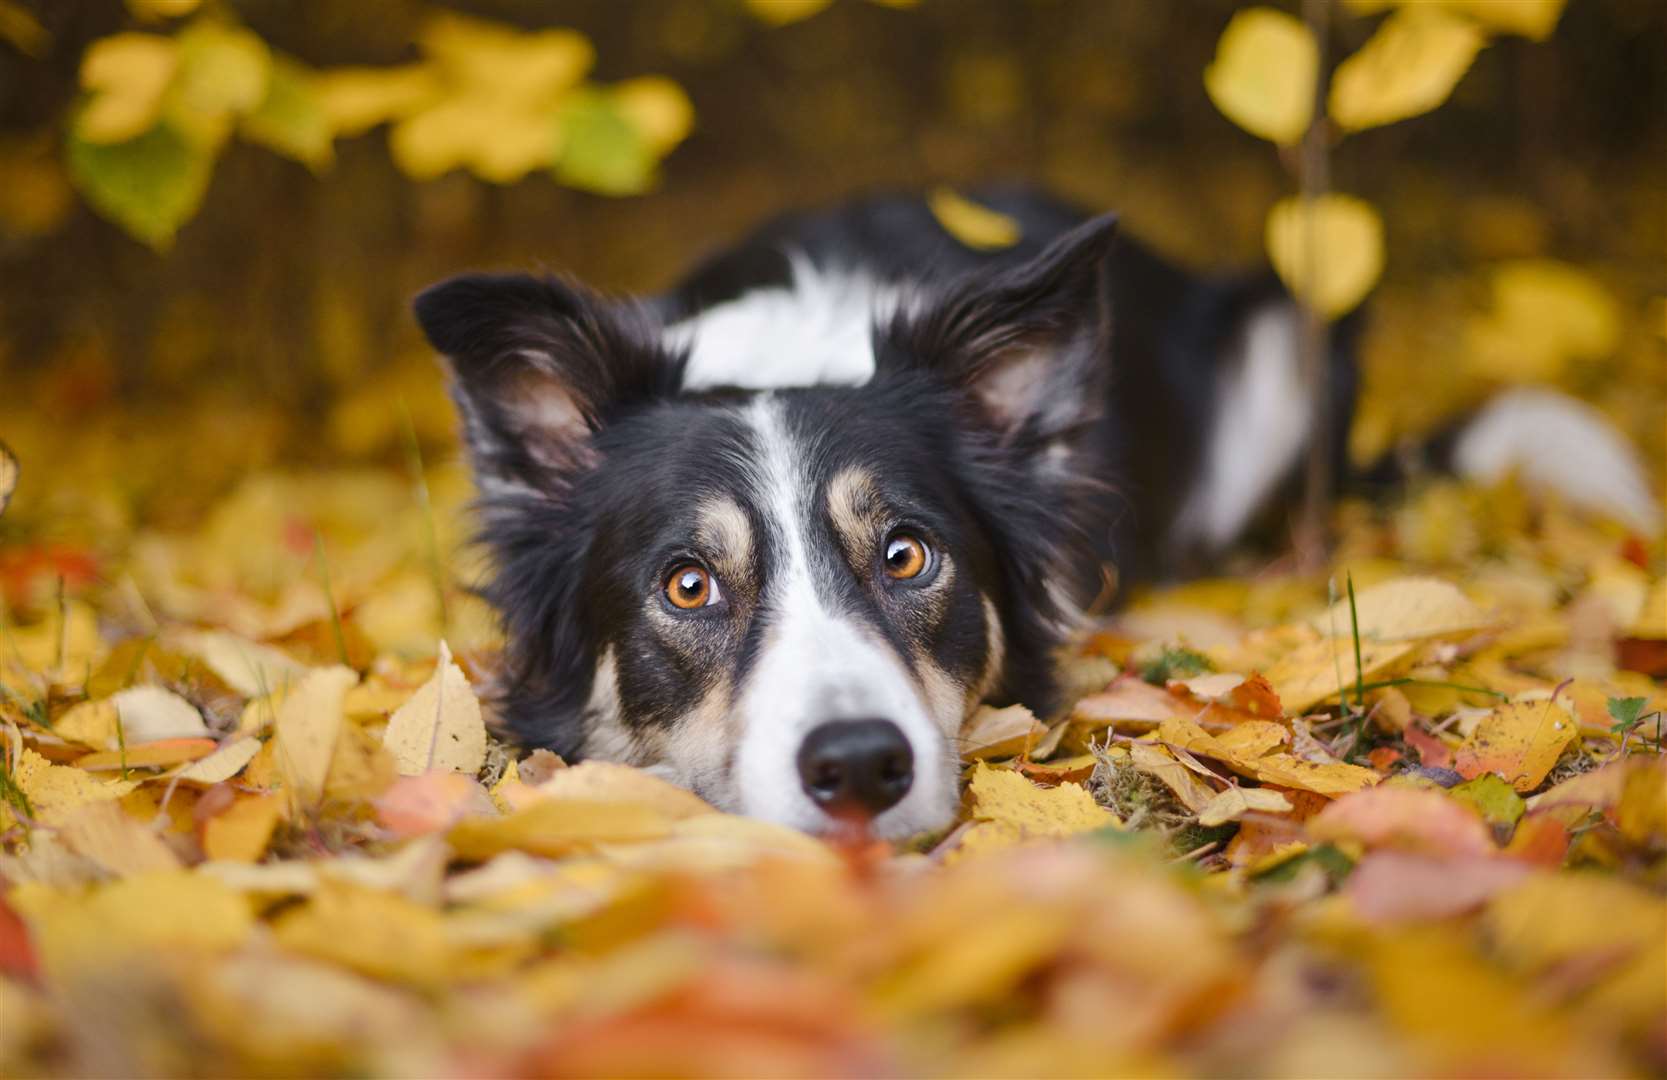 The border collie was initially bred to work with sheep and cattle. Image: iStock.